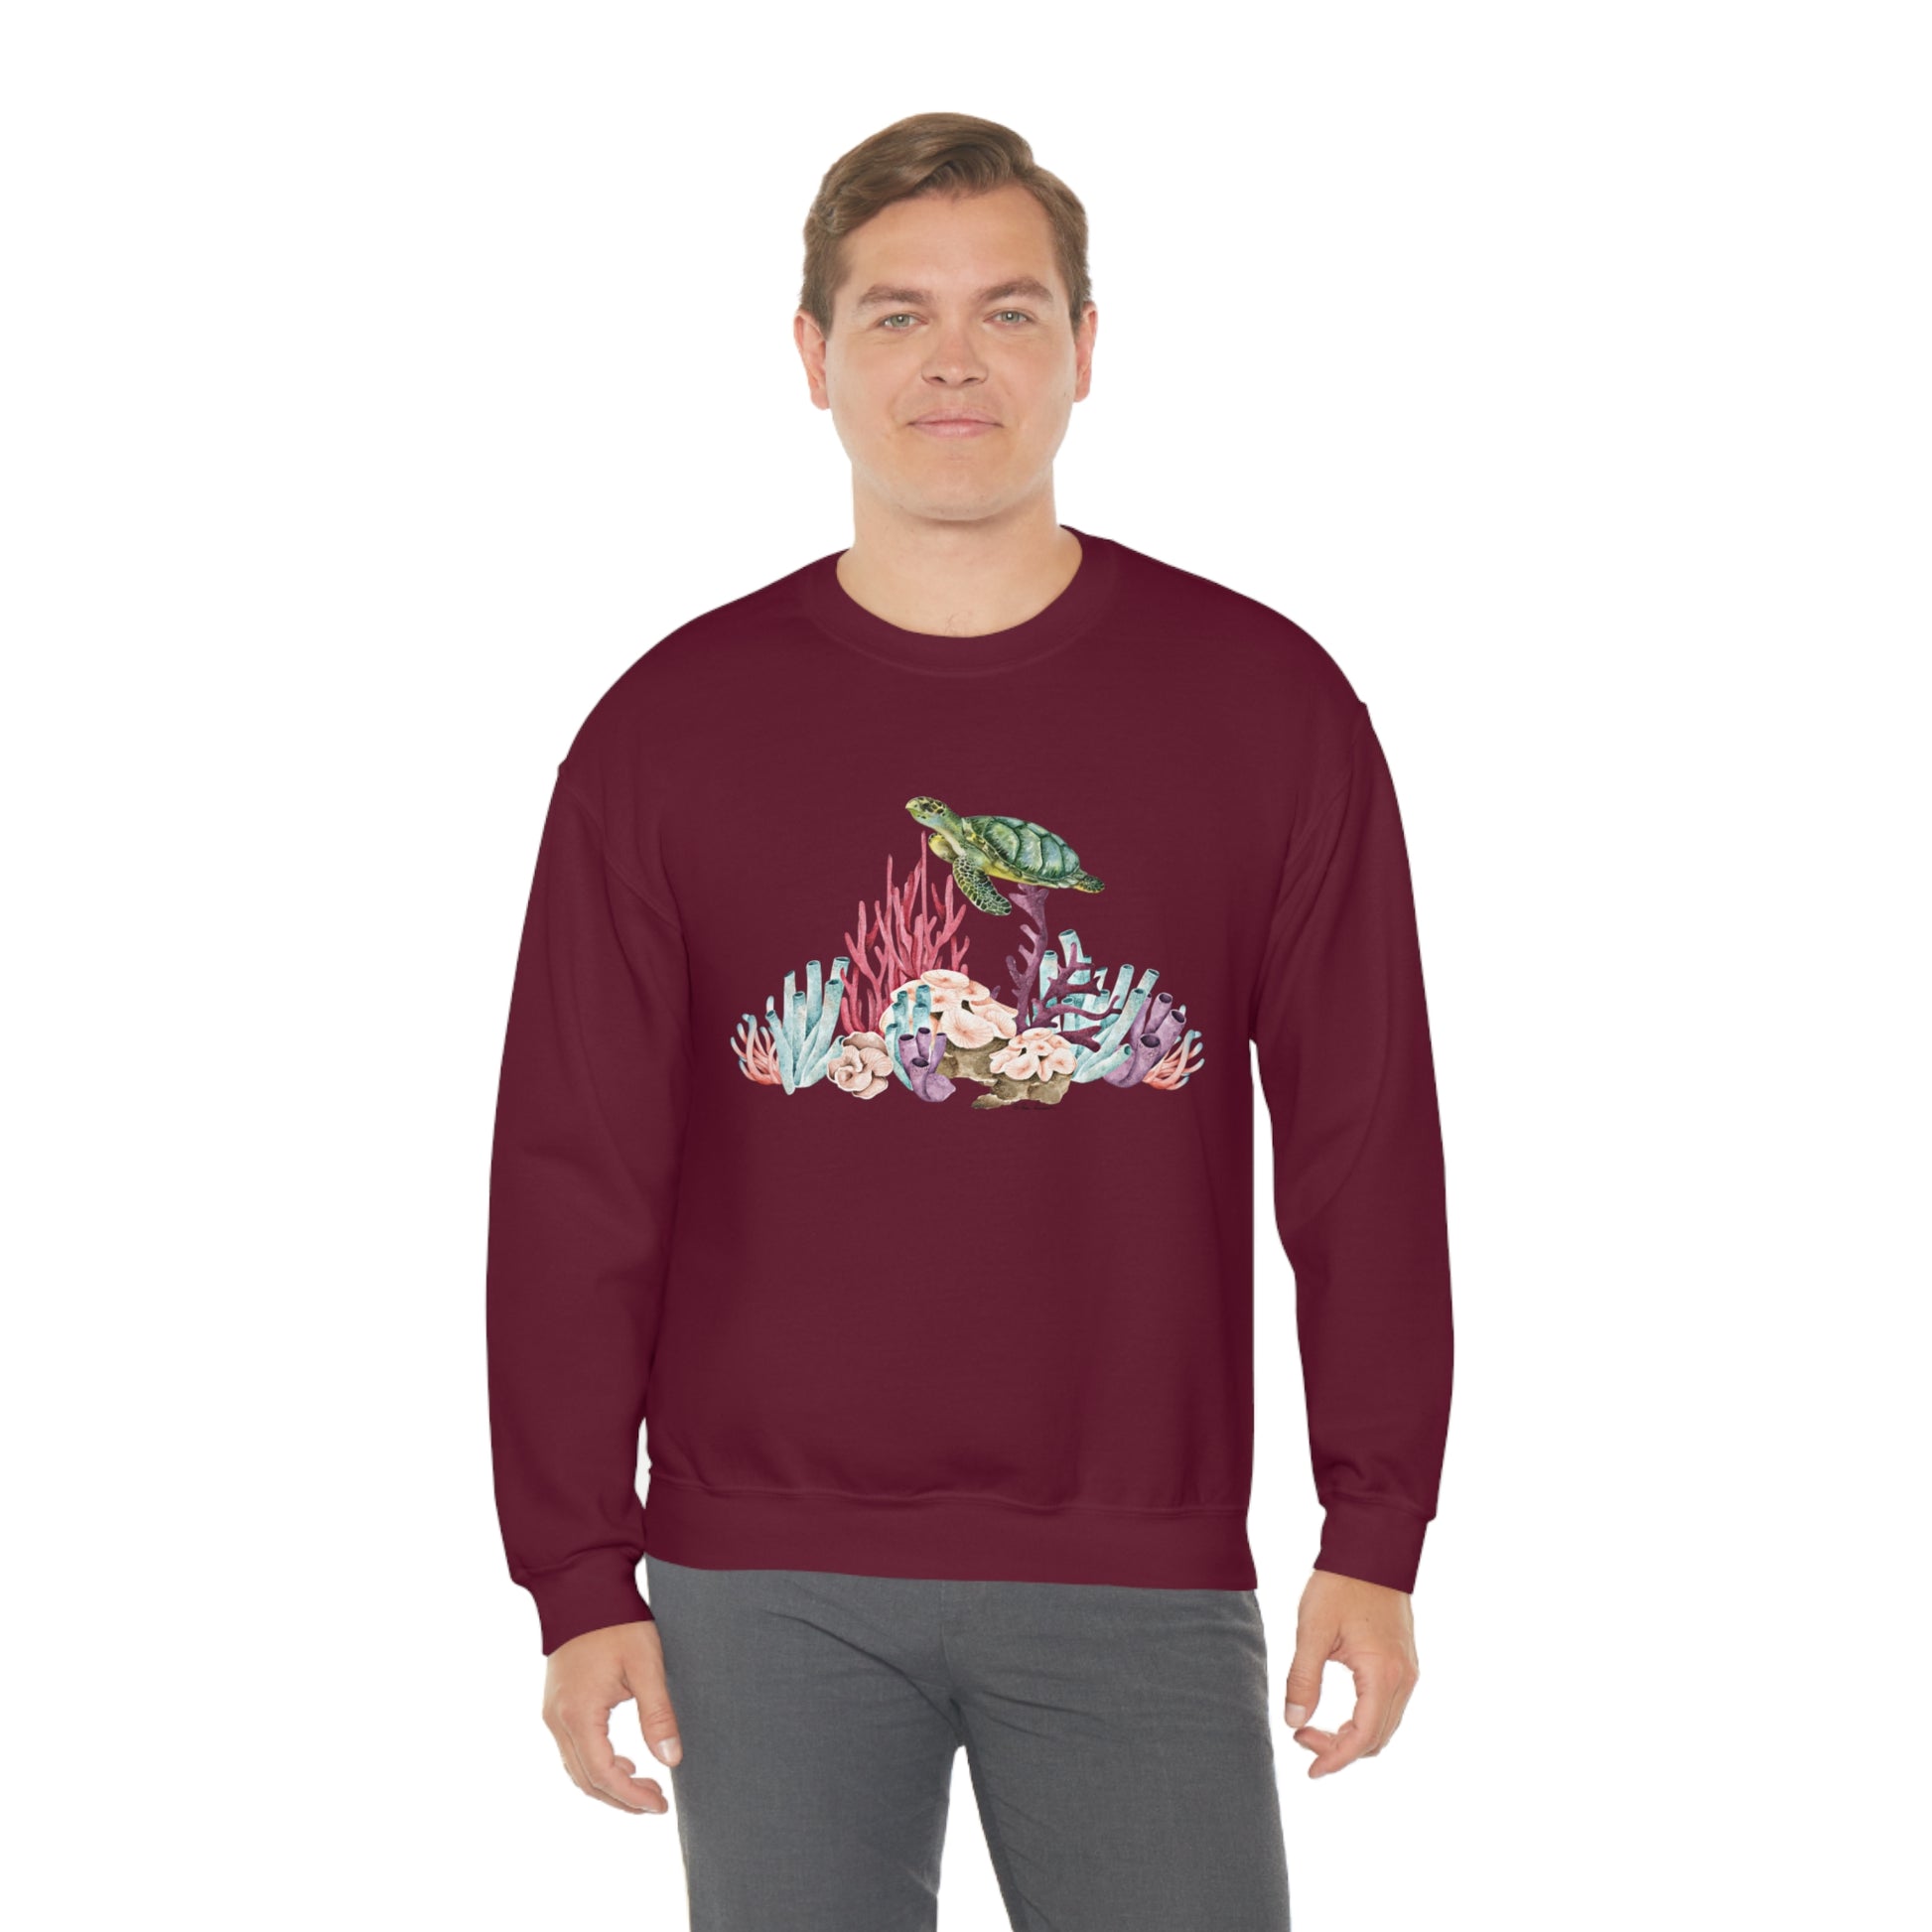 Mock up of a man wearing the Maroon shirt